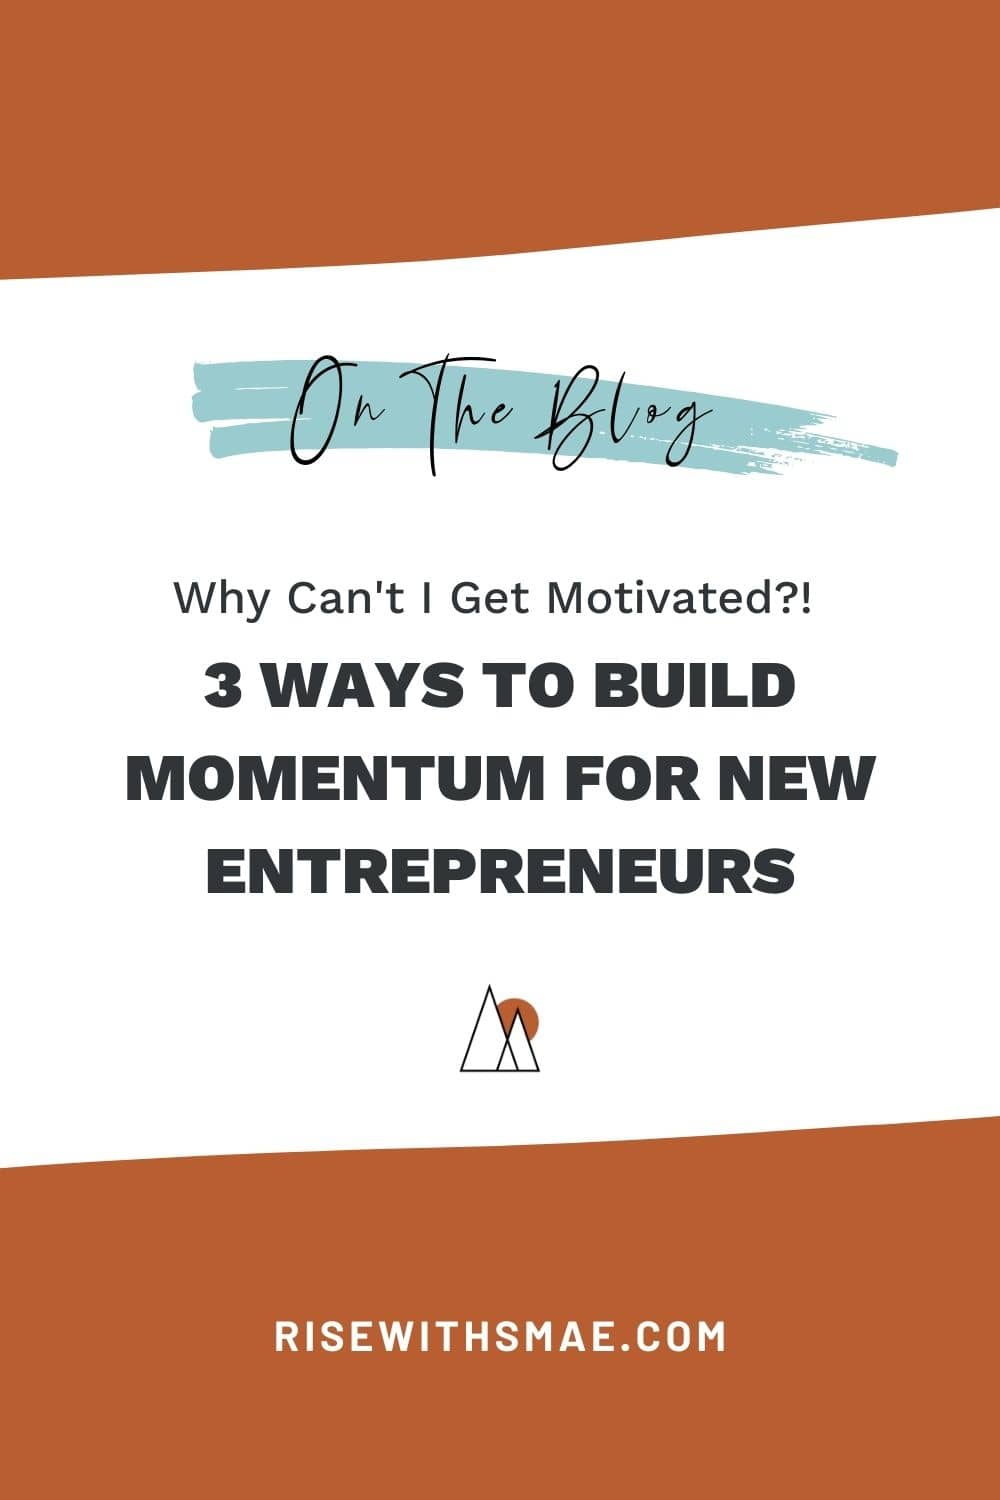 Why Can’t I Get Motivated?! 3 Ways to Build Momentum for Entrepreneurs